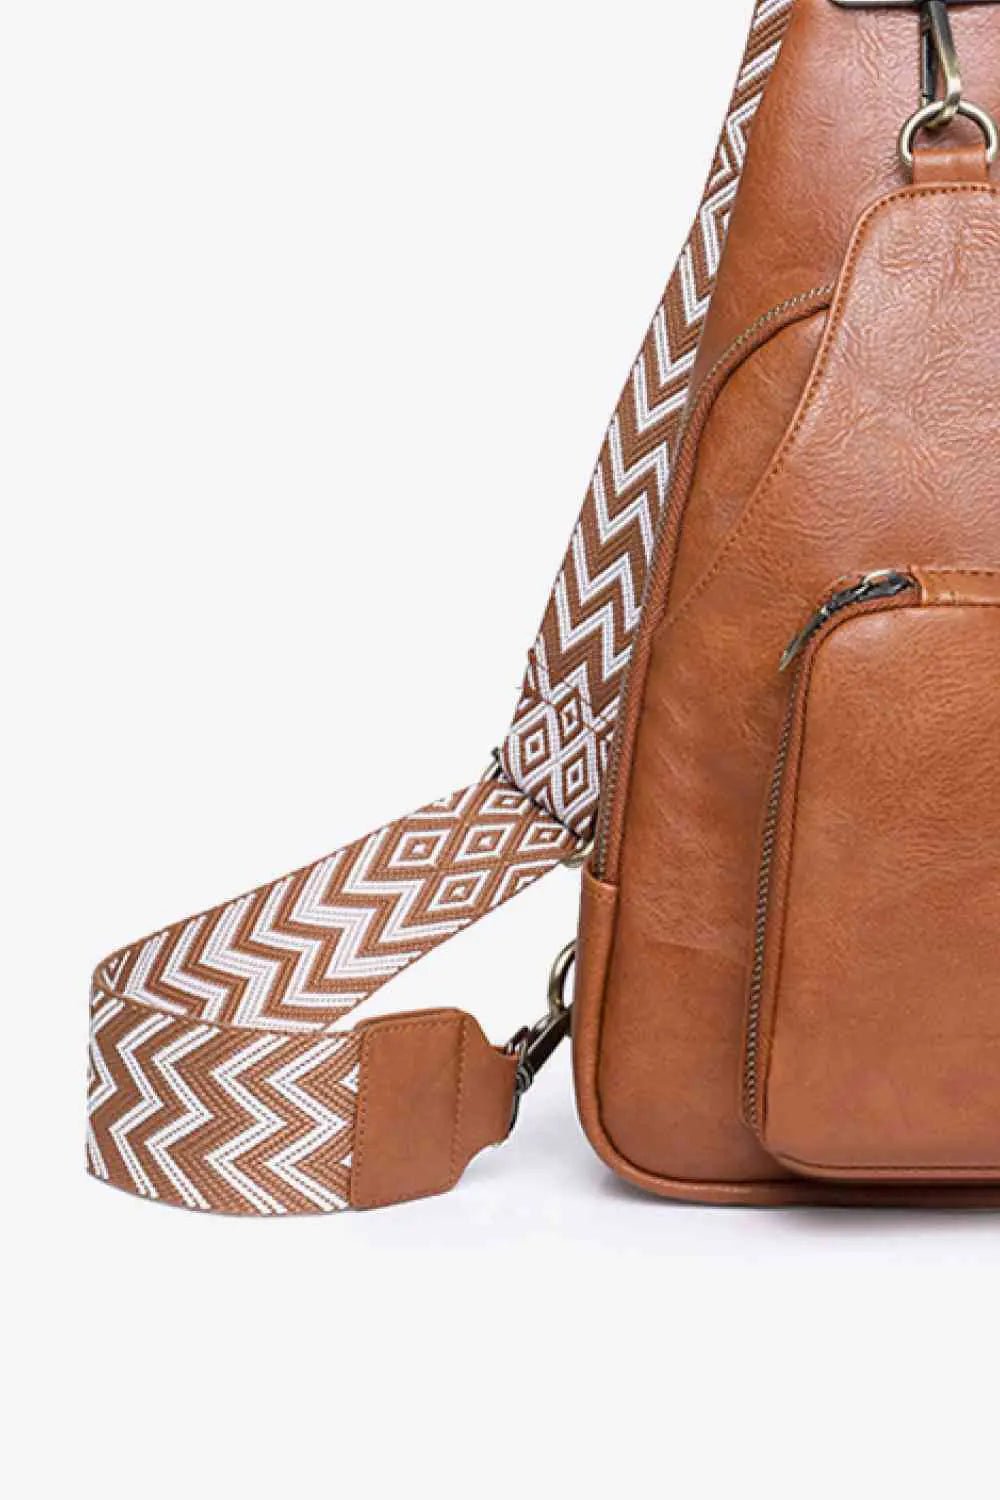 Travel Light and Stylish with the Take A Trip Small Sling Bag | Solid Pattern and PU Leather Material